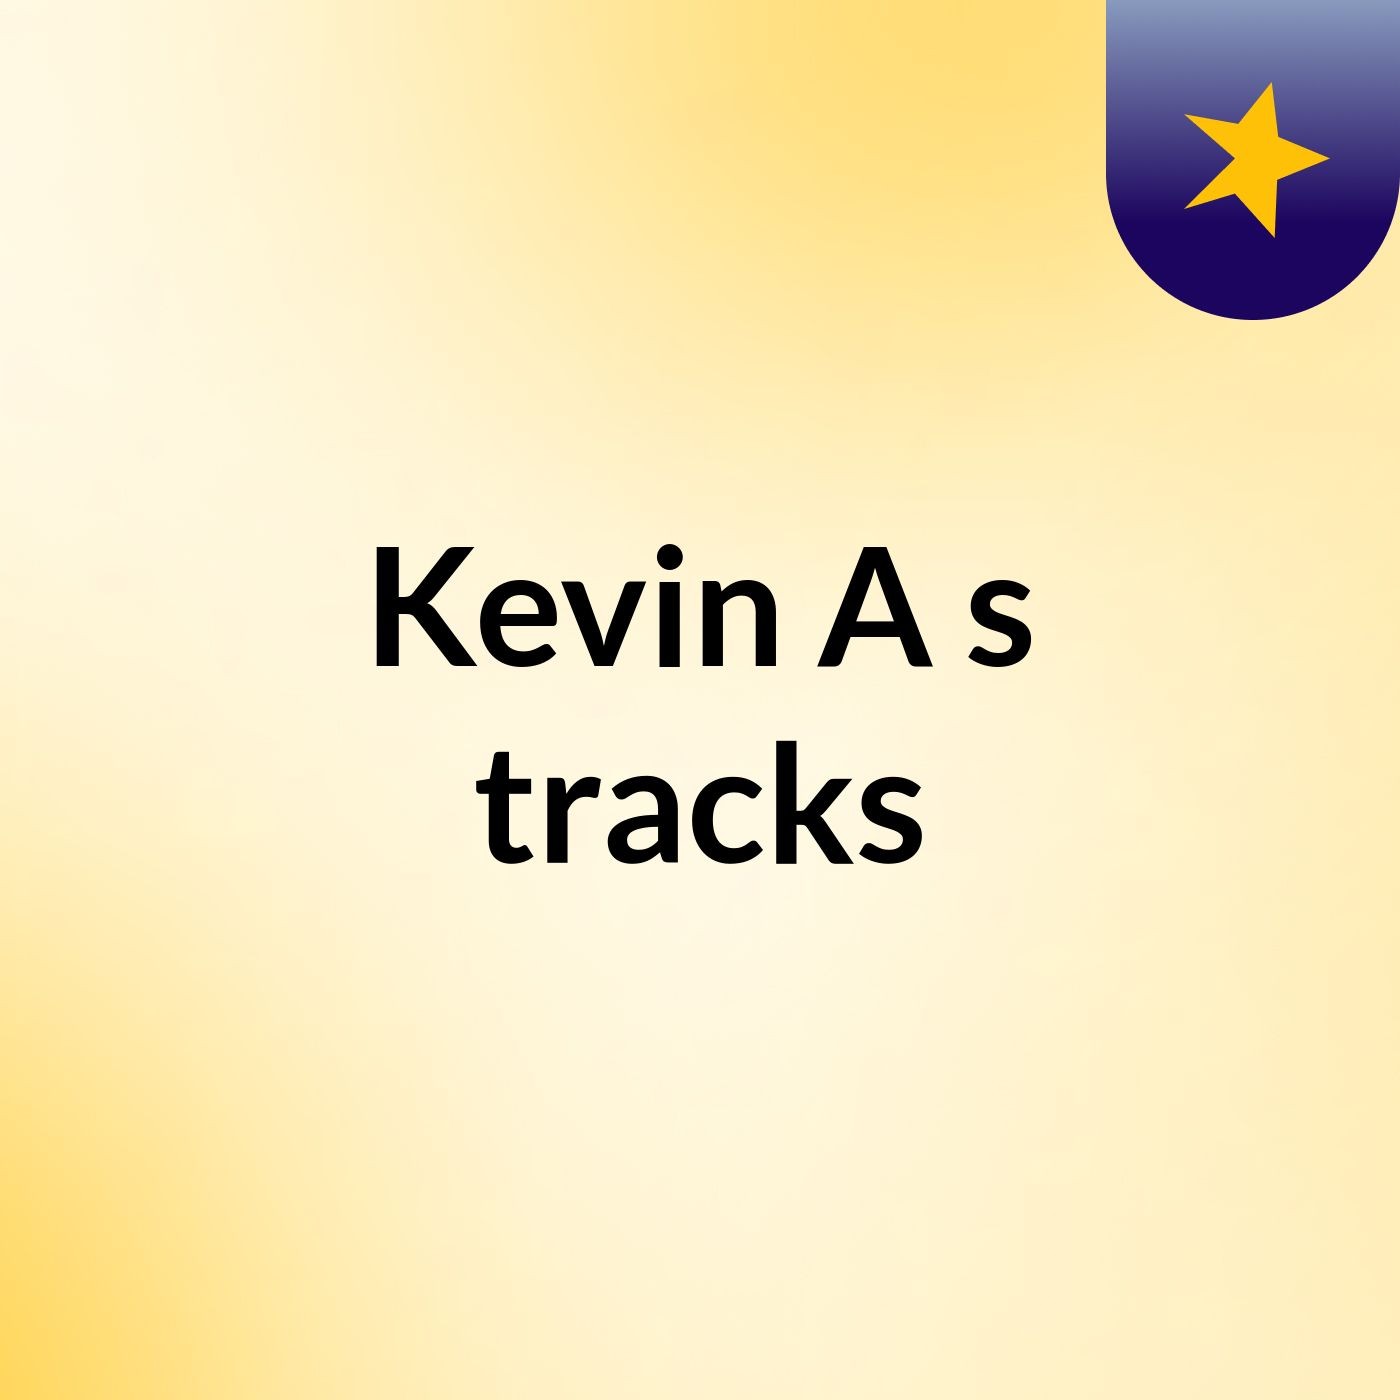 Kevin A's tracks